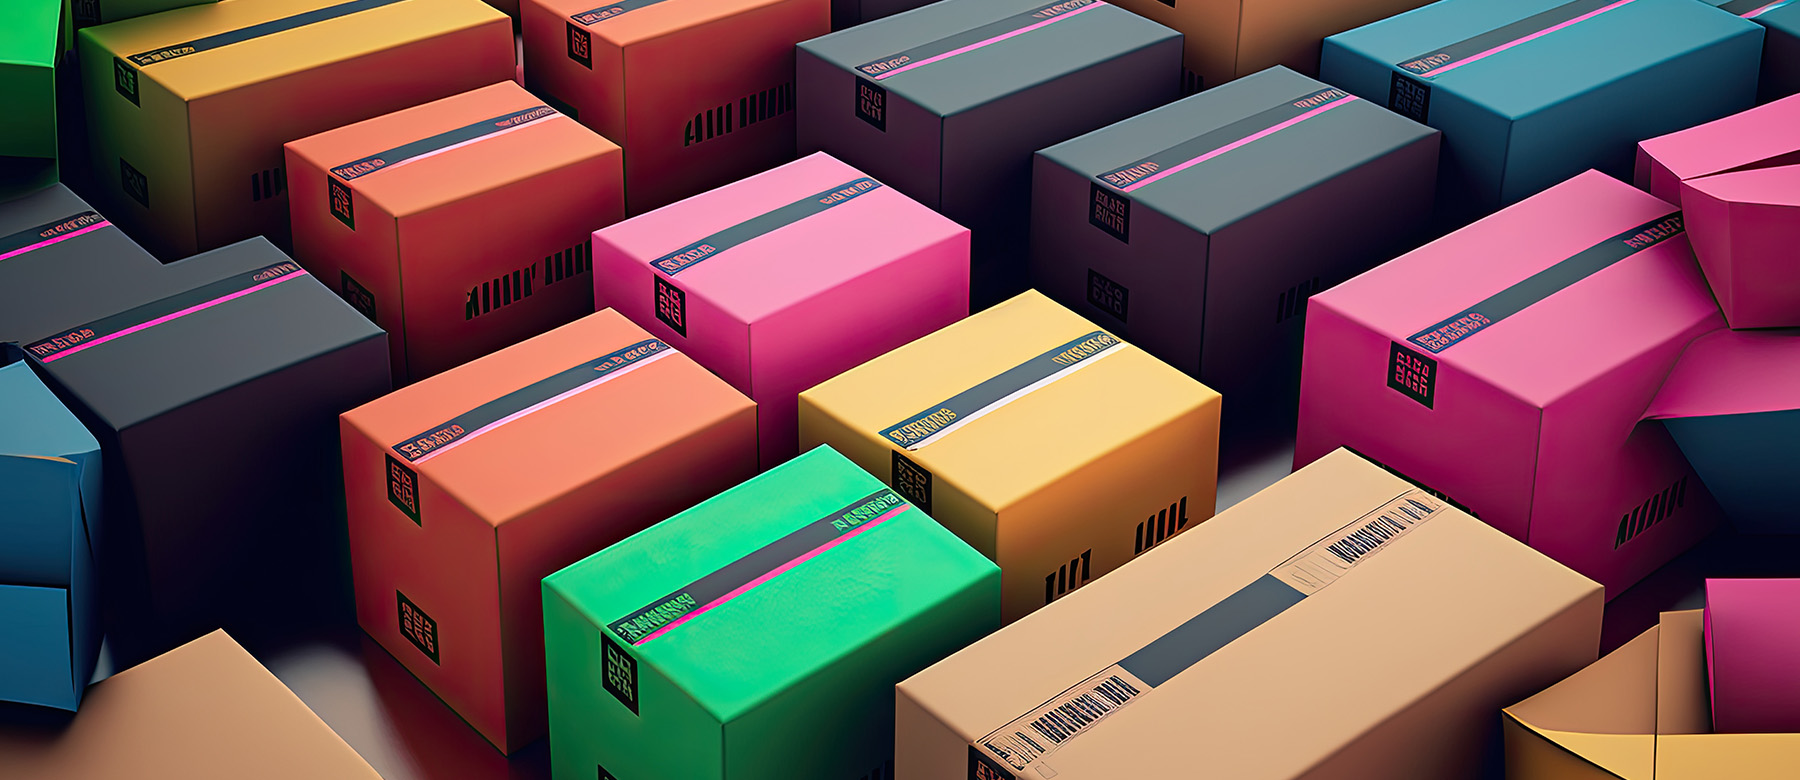 Lots of colourful boxes